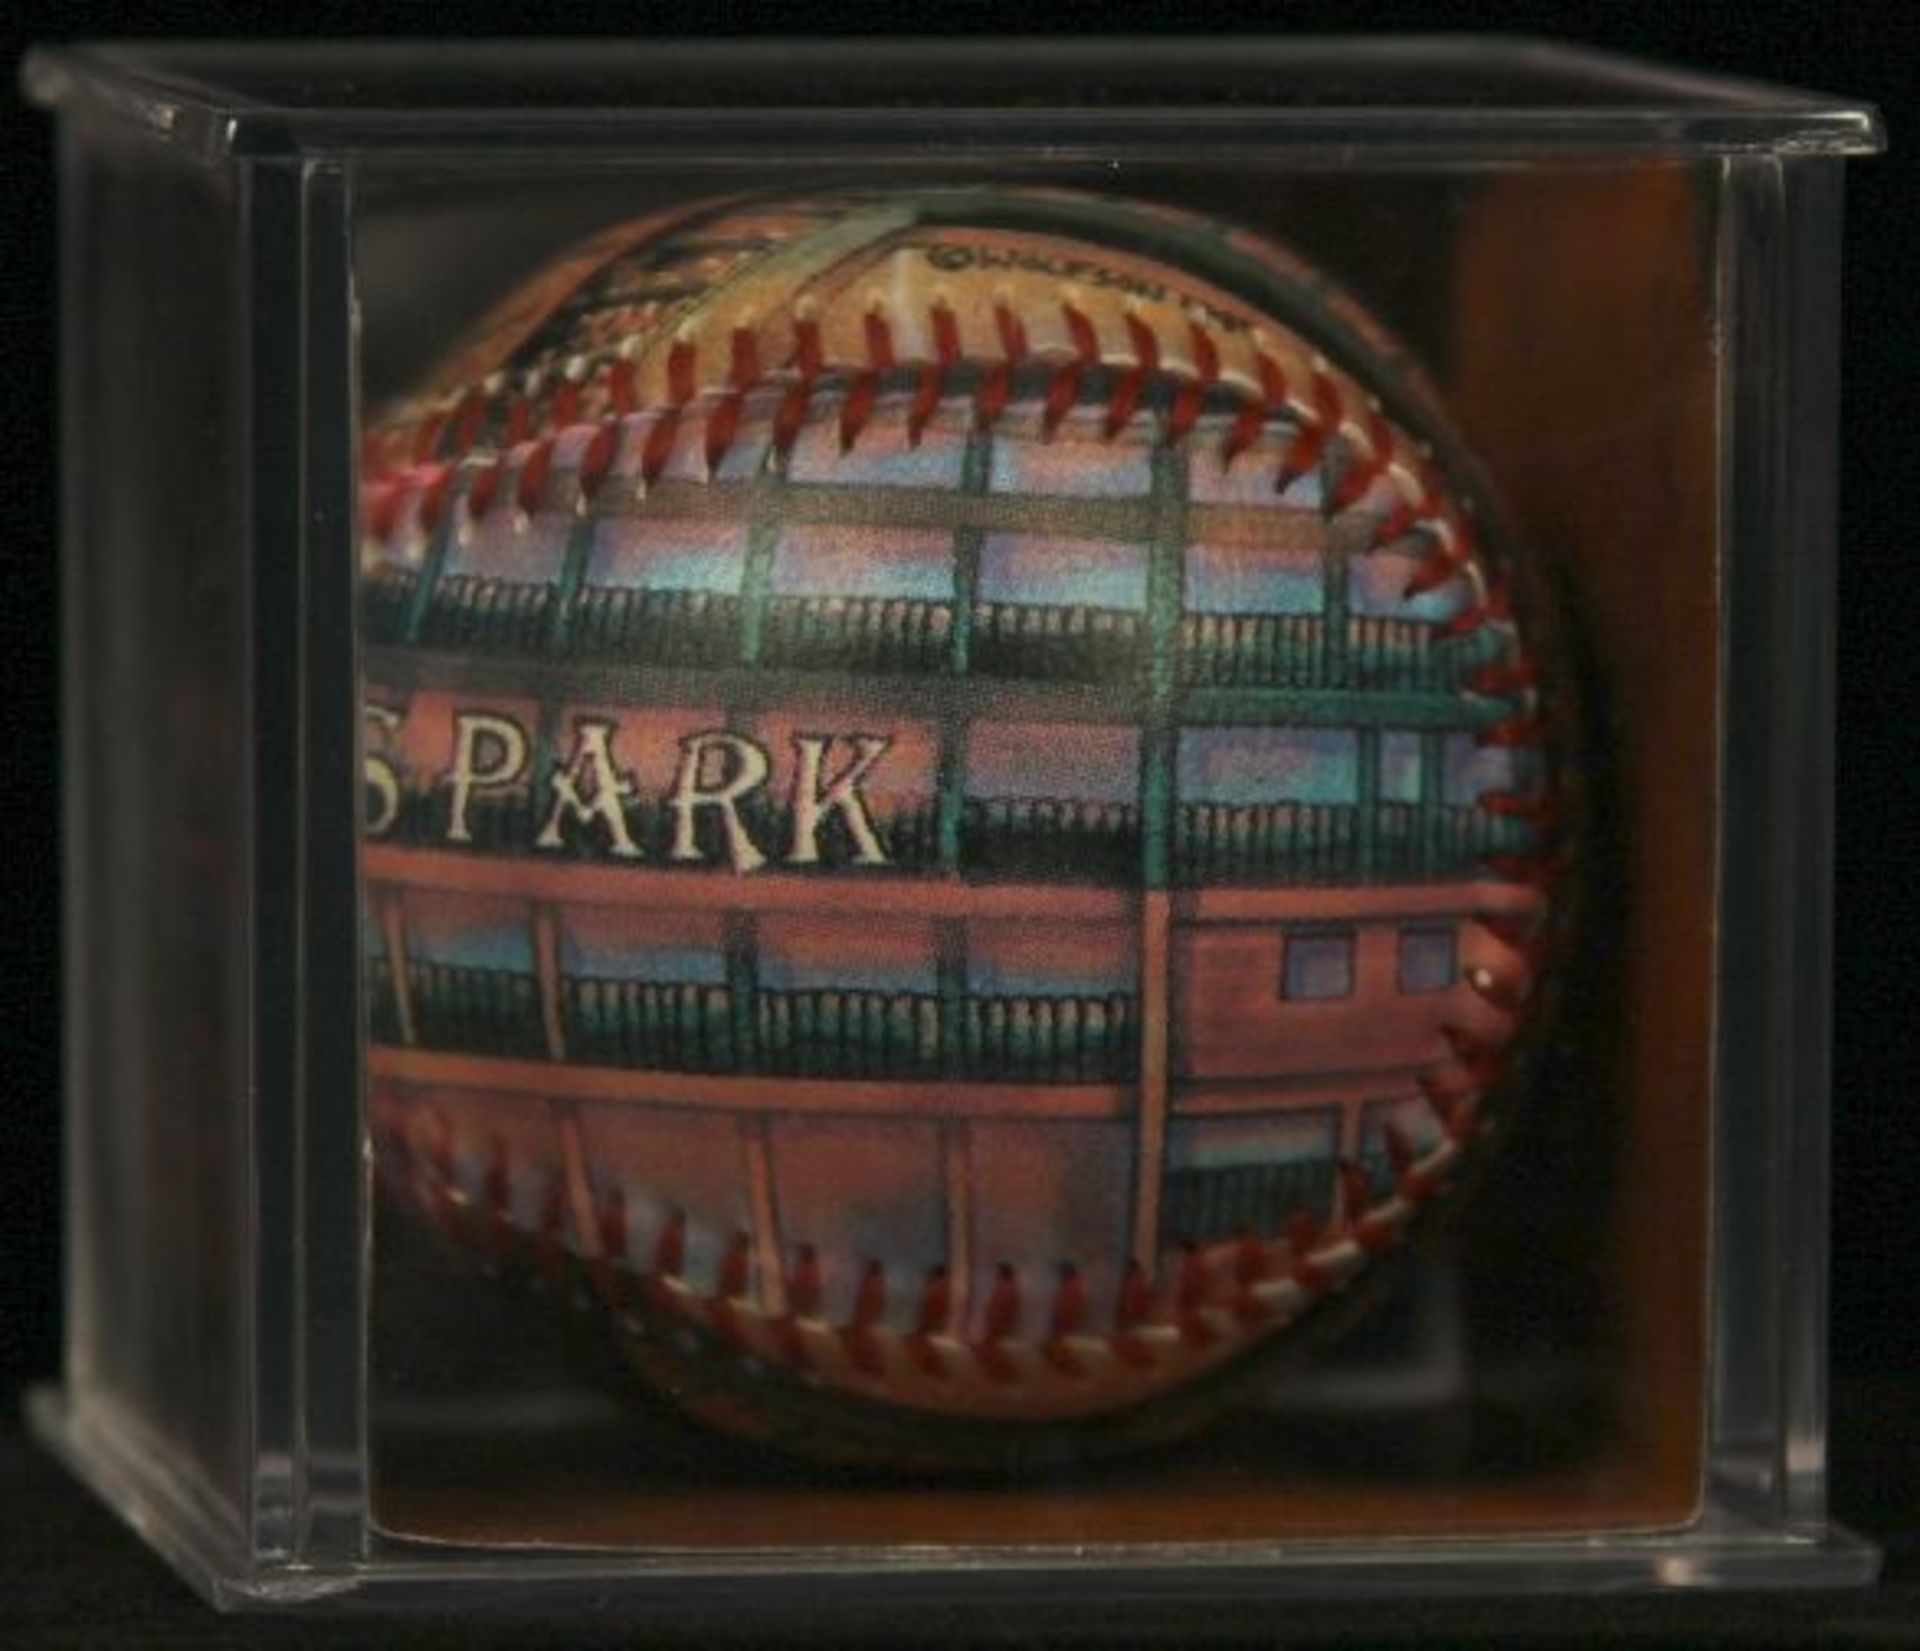 Unforgettaball! "Sportsman's Park" Nostalgia Series Collectable Baseball - Image 3 of 4